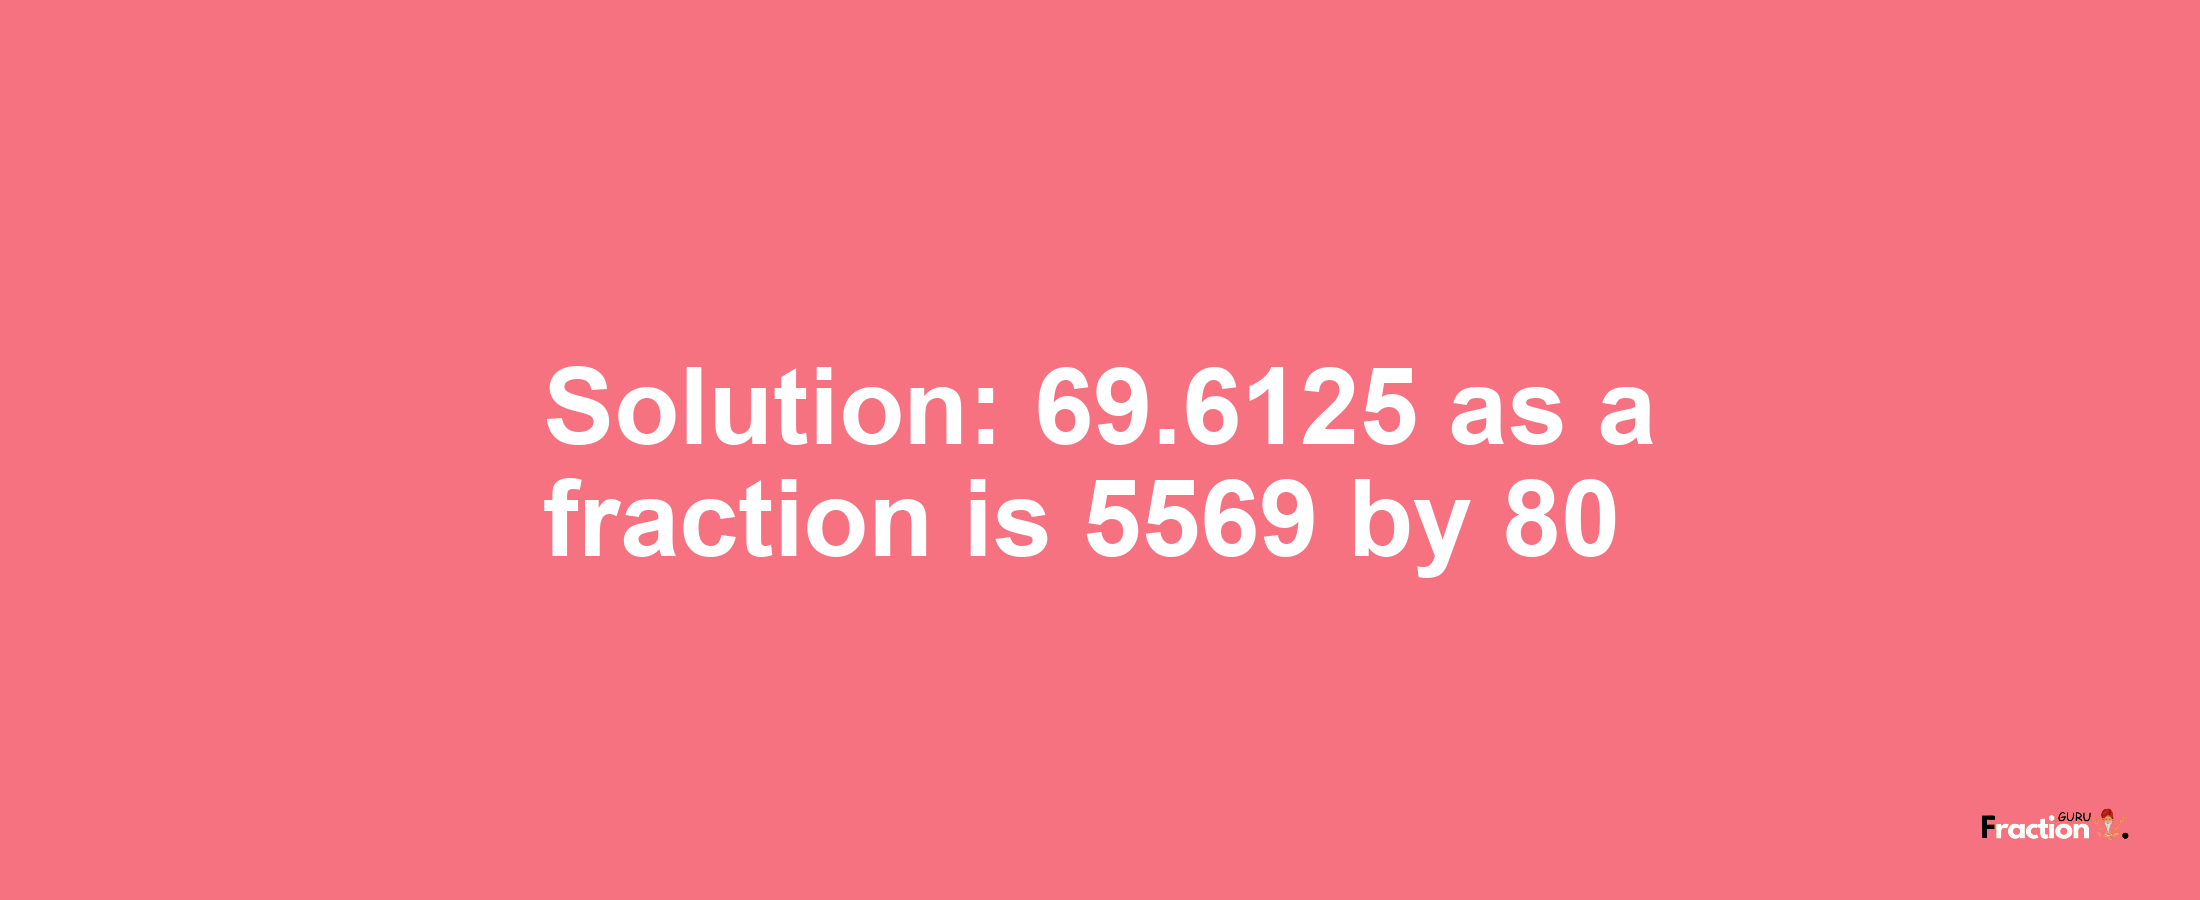 Solution:69.6125 as a fraction is 5569/80